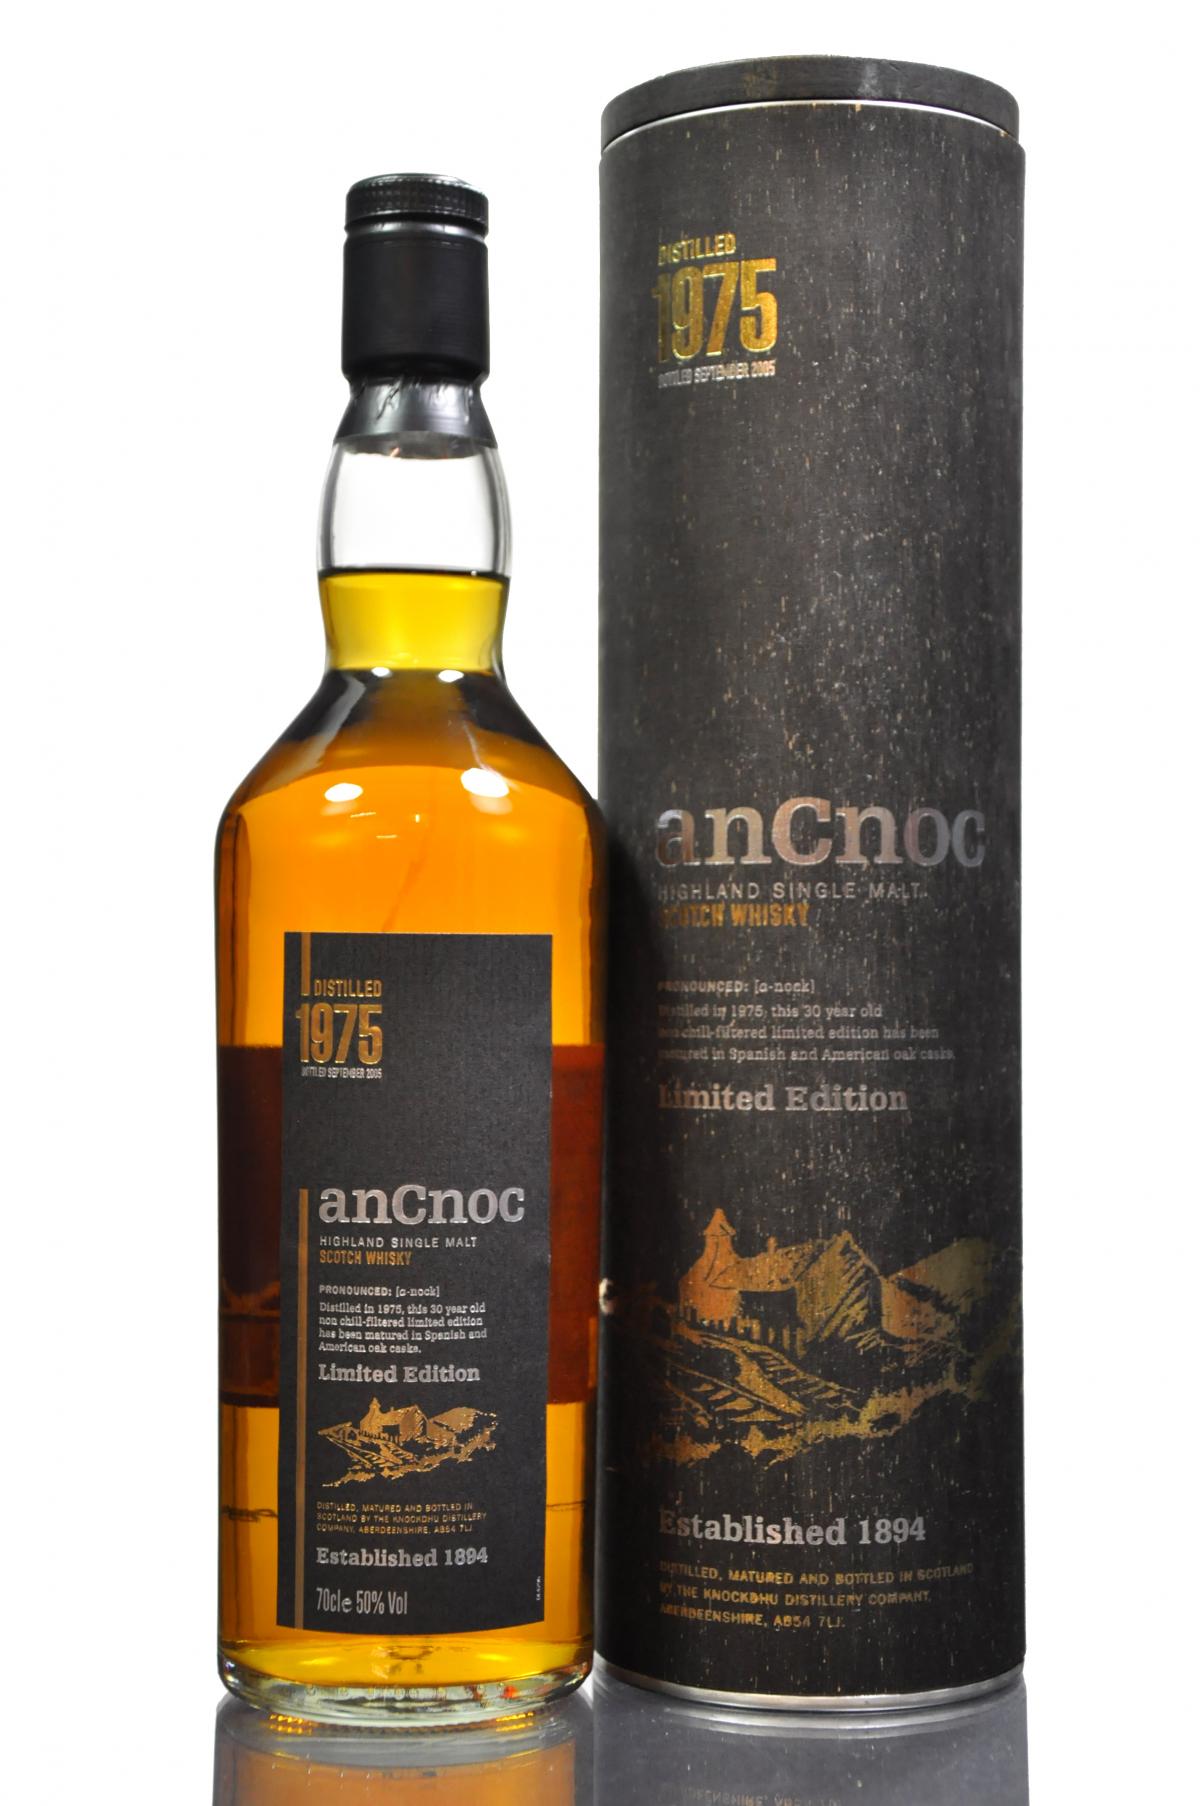 An Cnoc 1975-2005 - 30 Year Old